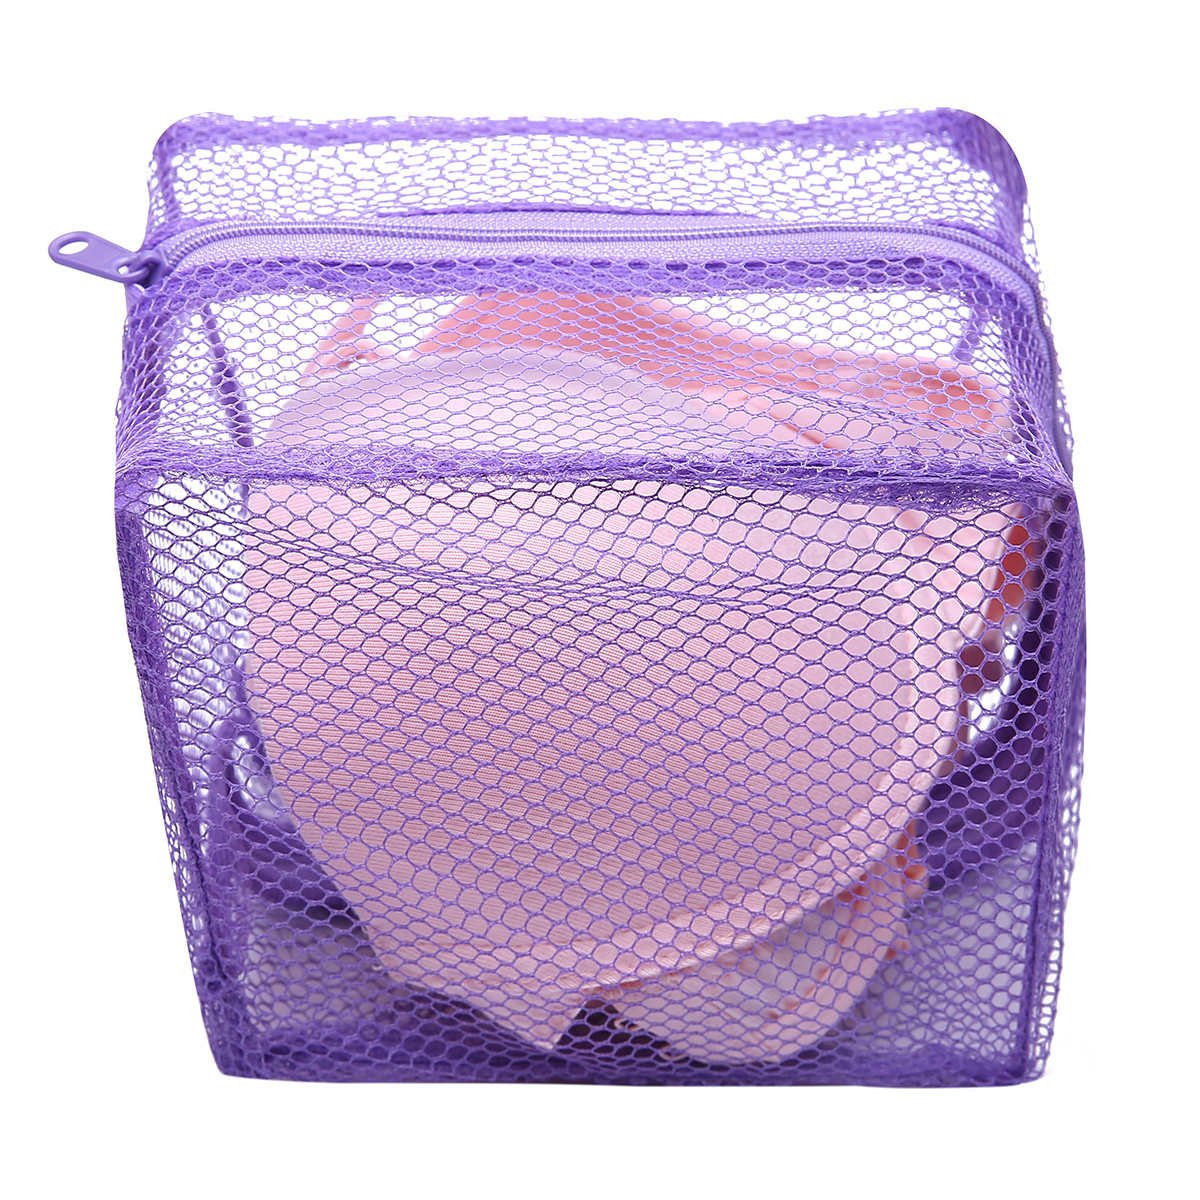 Mesh Laundry Bag Washing Clothes Zipper Solid Net For Bras And Lingerie 2